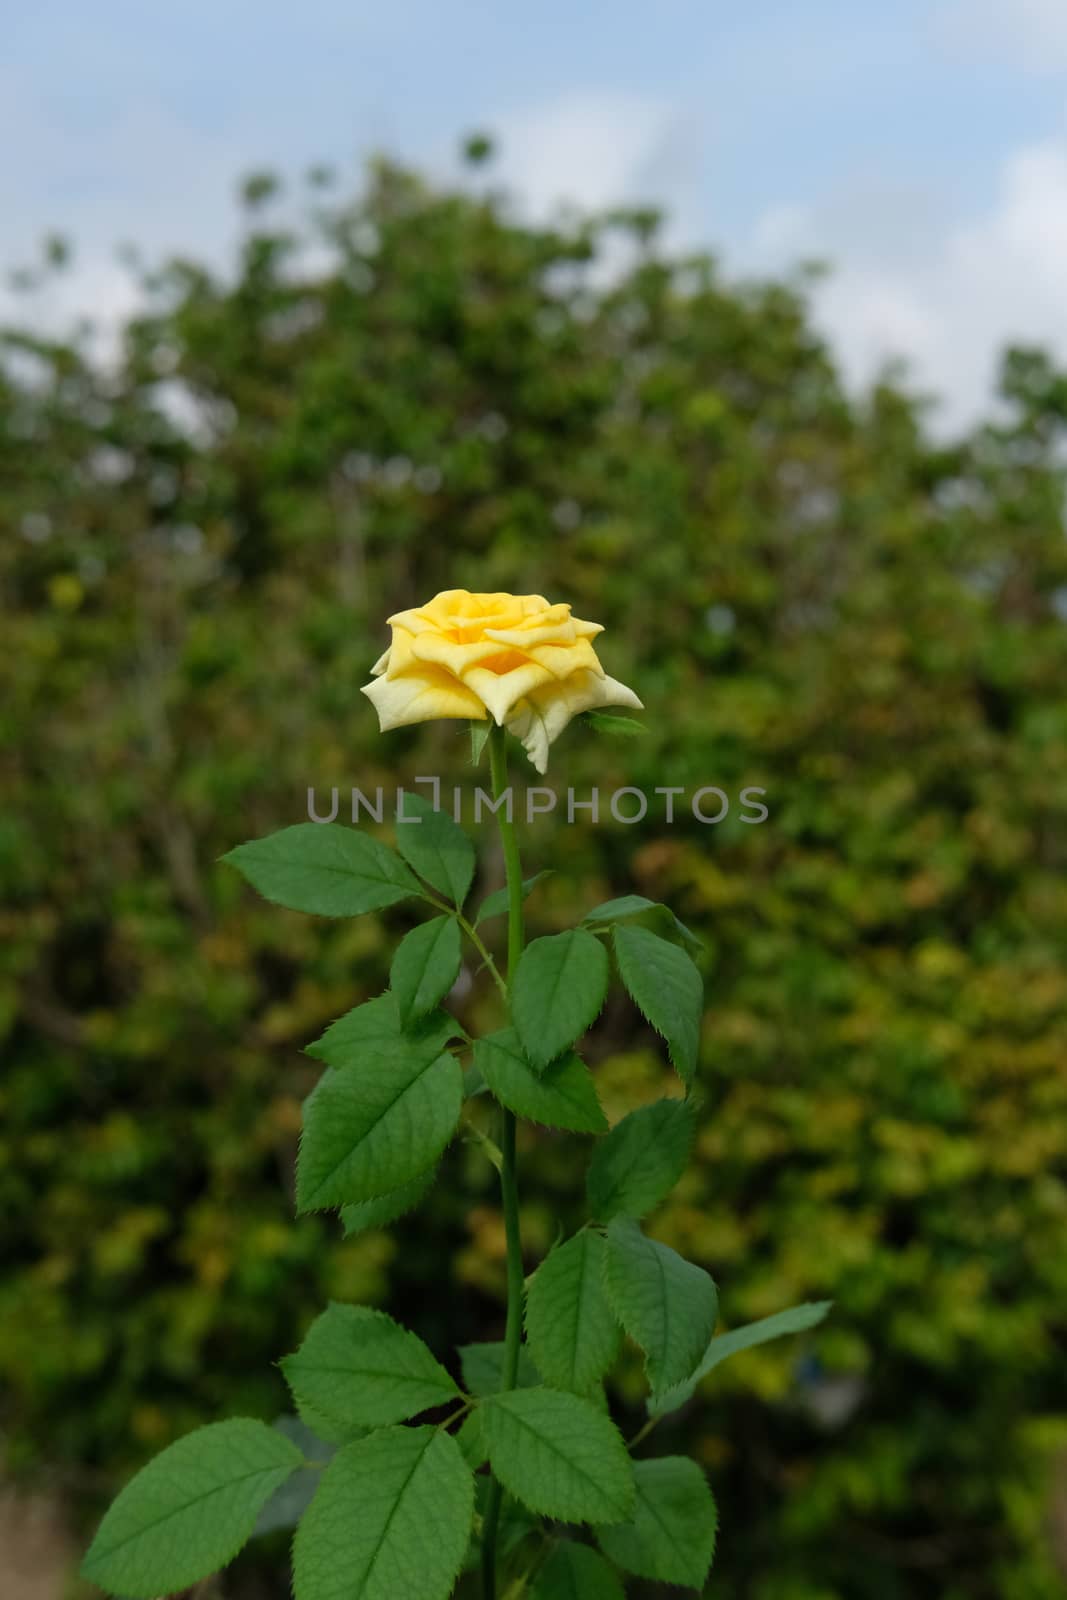 yellow rose flower with dreamy green background by Macrostud